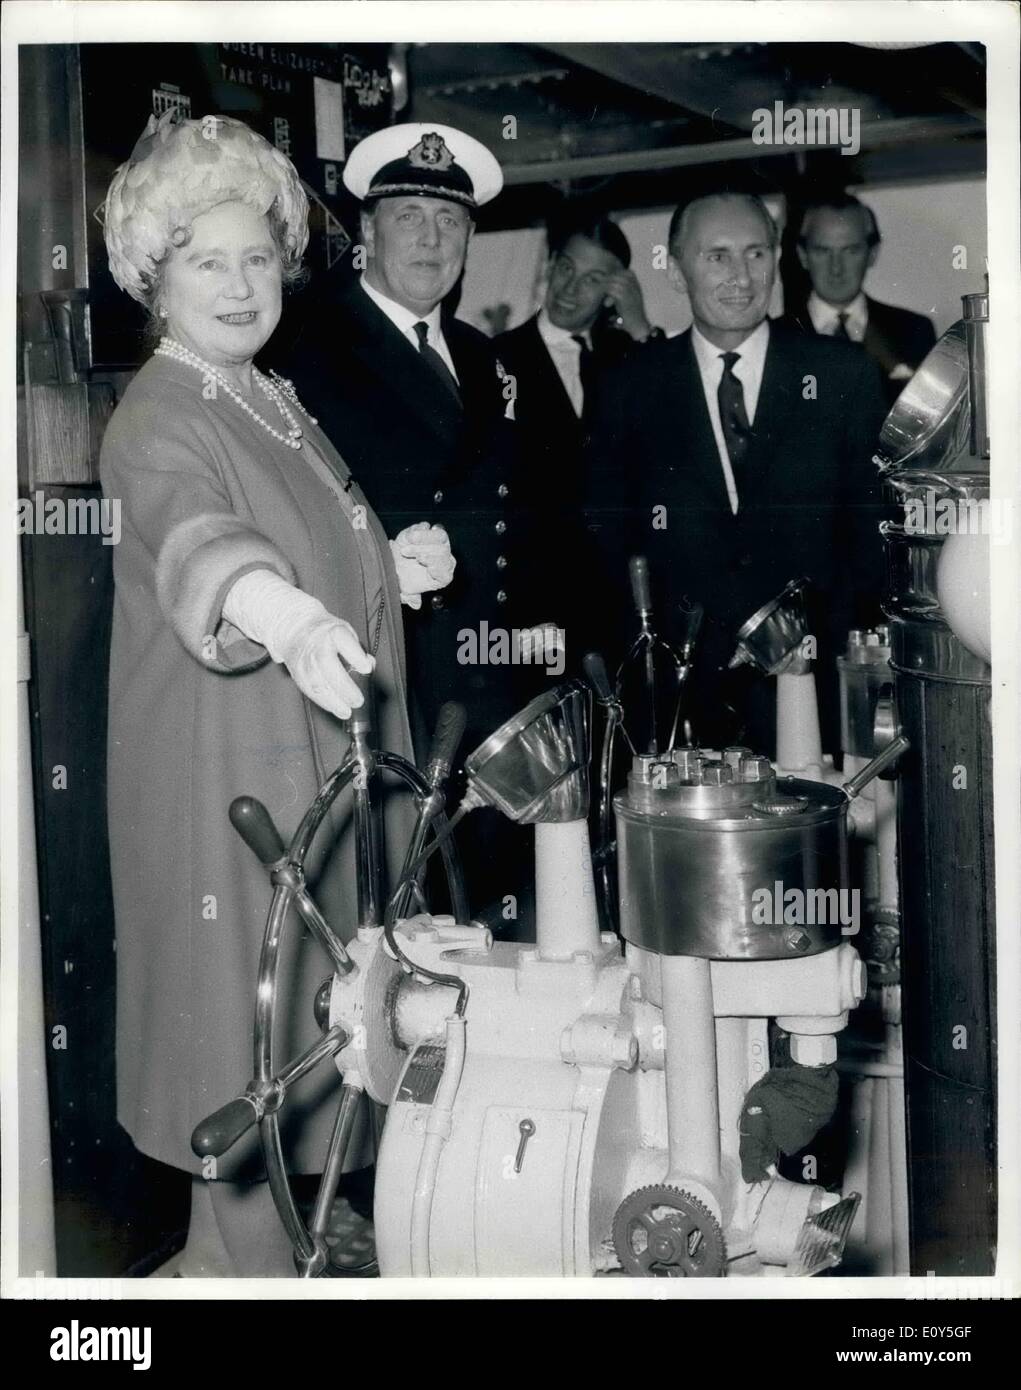 Nov. 11, 1968 - Farewell visit to ship she named.: Southampton: Queen Elizabeth, The Queen Mother, at the wheel of the Cunard Liner Queen Elizabeth which she named and launched 30 years ago. The Queen mother paid a ''goodbye'' visit ti the world's largest liner here today before she sails to retirement at Port Everglades, FLorida. Next to her is Capt. Geoffrey Thrippleton Marr, Commondore of the Cunard Fleet. Stock Photo